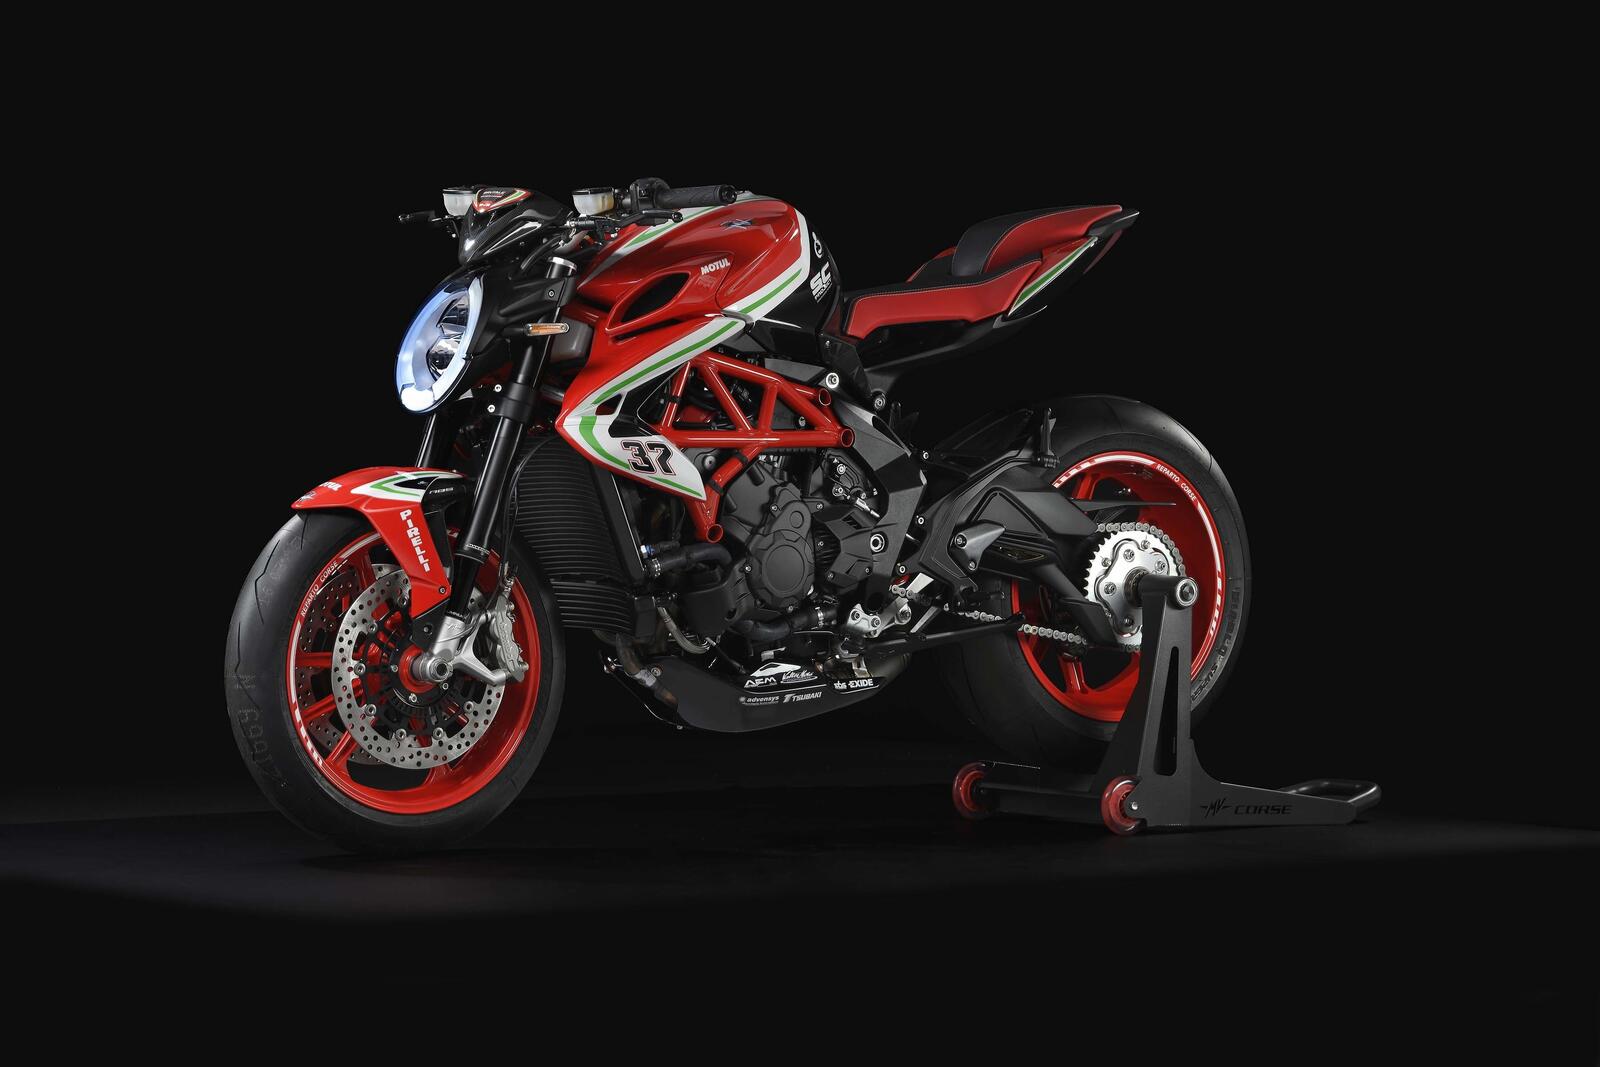 Wallpapers mv agusta brutale 800 rc side view motorcycle on the desktop